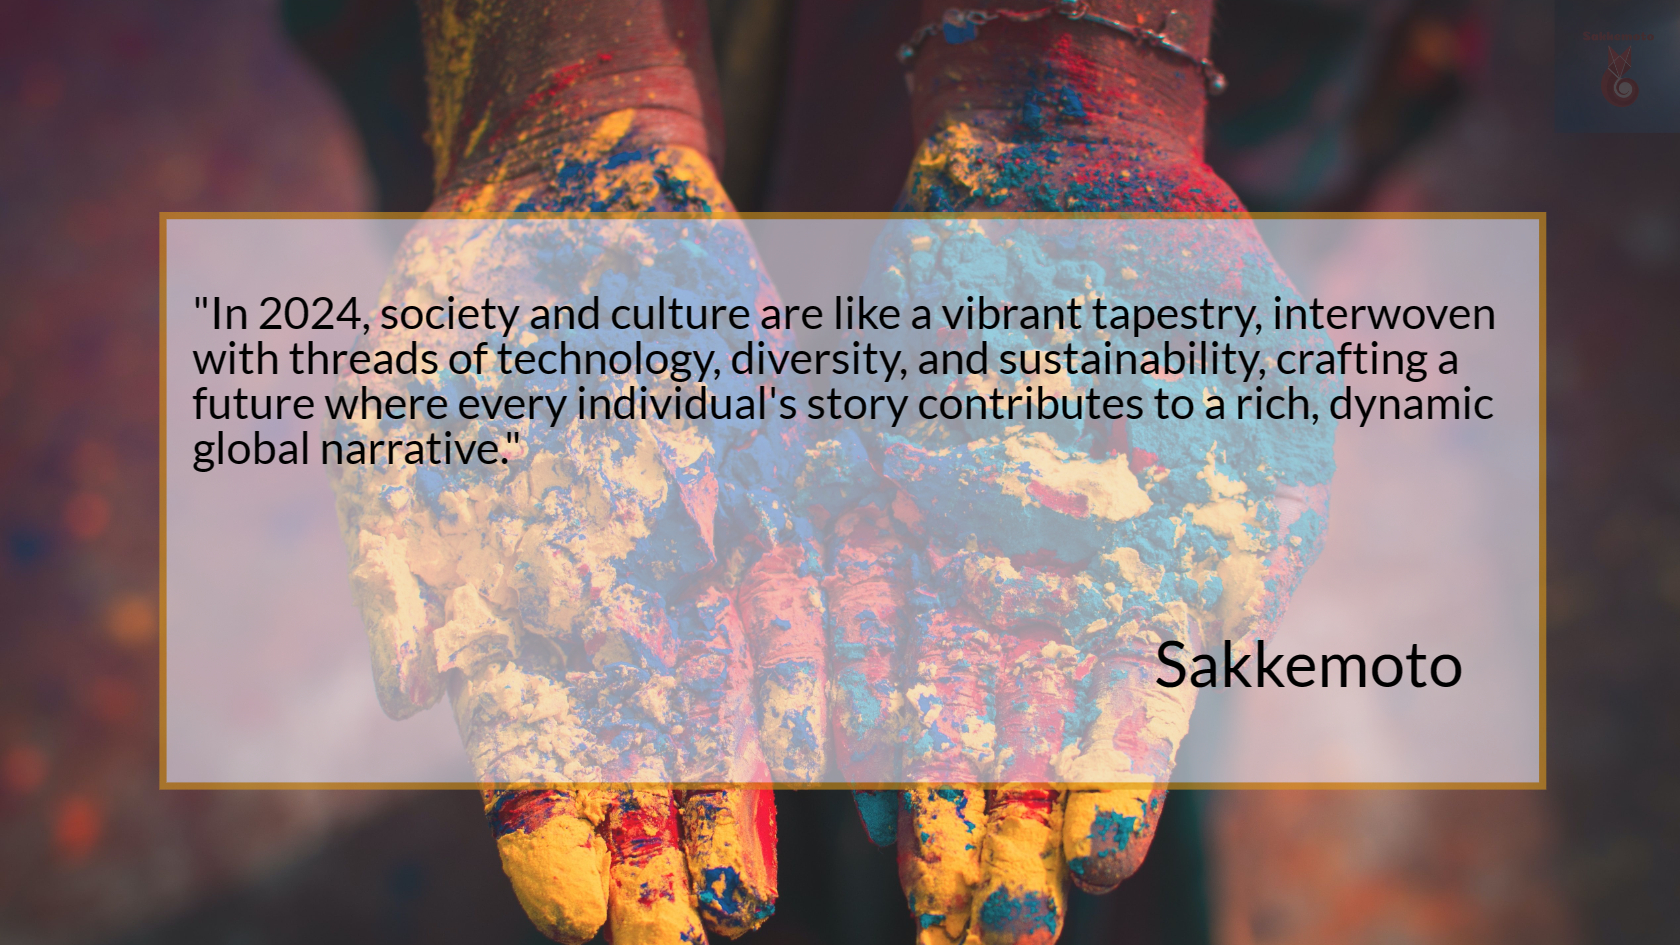 In 2024, society and culture are like a vibrant tapestry, interwoven with threads of technology,